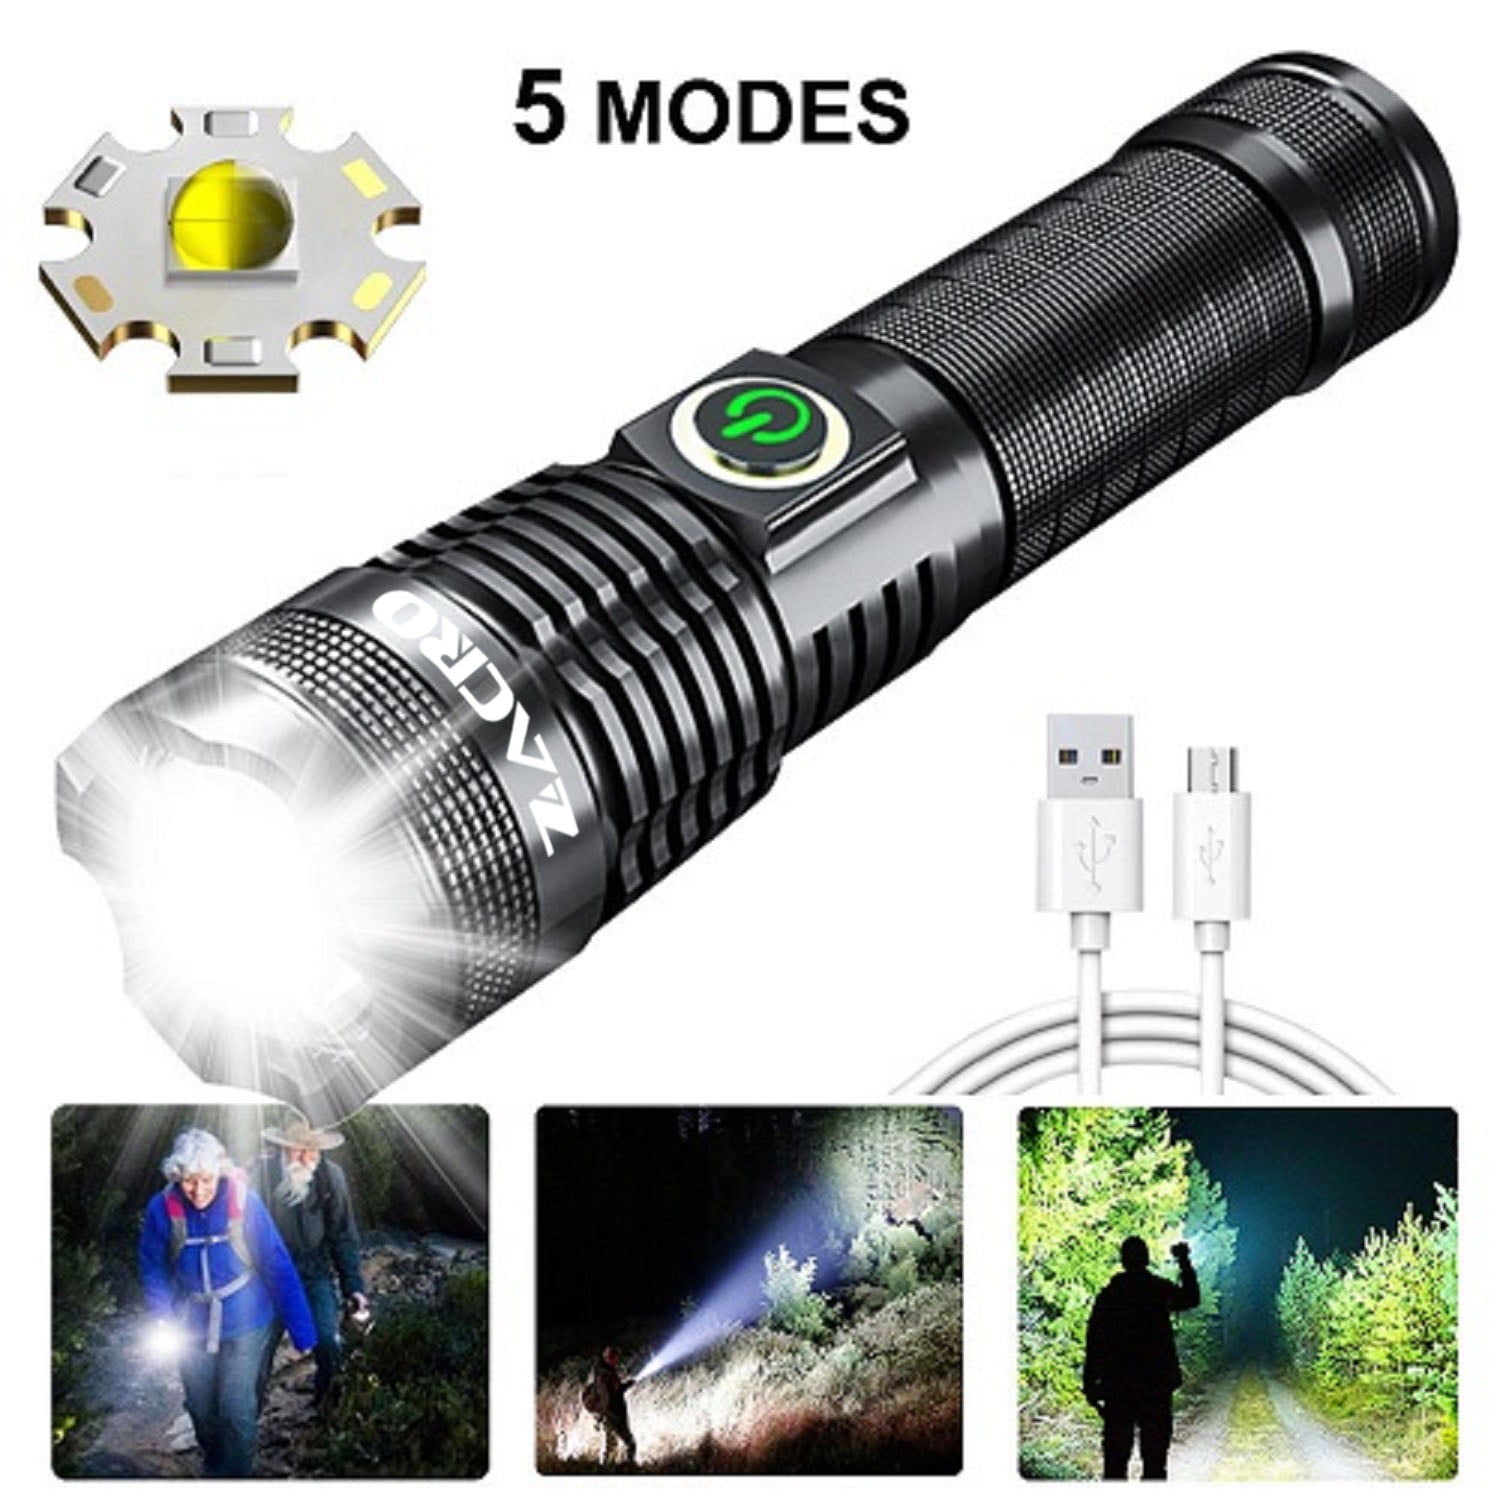 100000 Lumens Rechargeable Flashlight, Searchlight Super Bright Powerful LED Flashlight 5 Modes Zoom Torch for Emergency Hiking Hunting Camping Sport (Battery Included) - Walmart.com